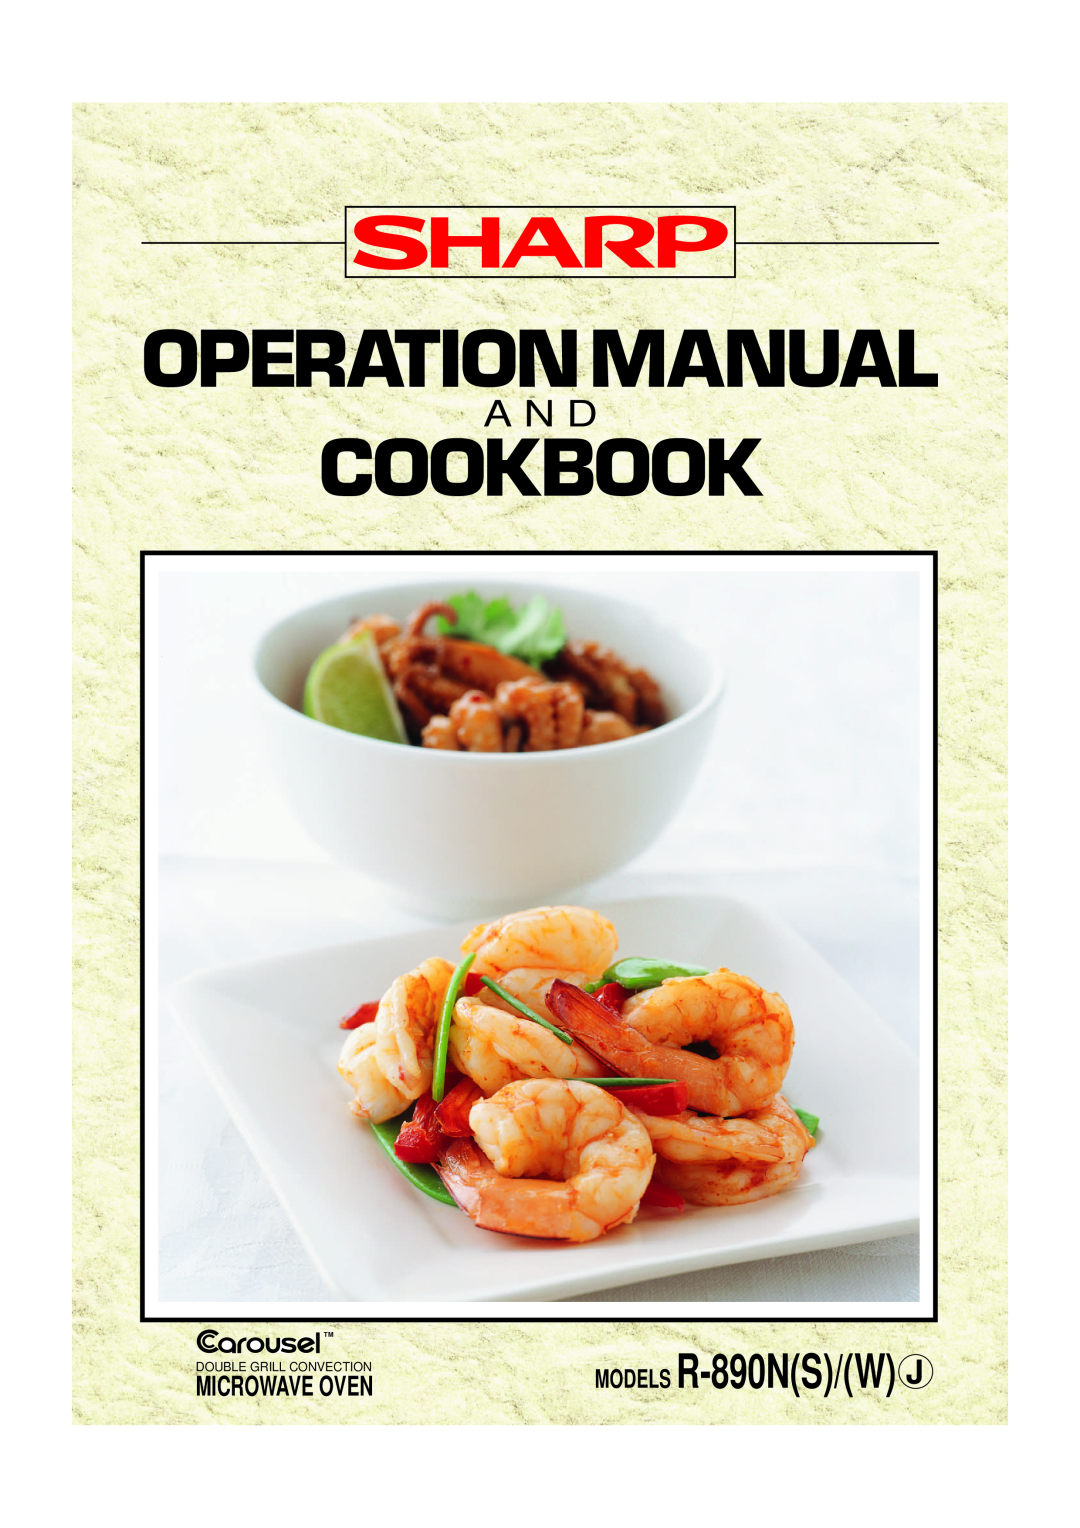 Sharp operation manual Operationmanual, Cookbook, A N D, MODELS R-890NS/W J, Microwave Oven 